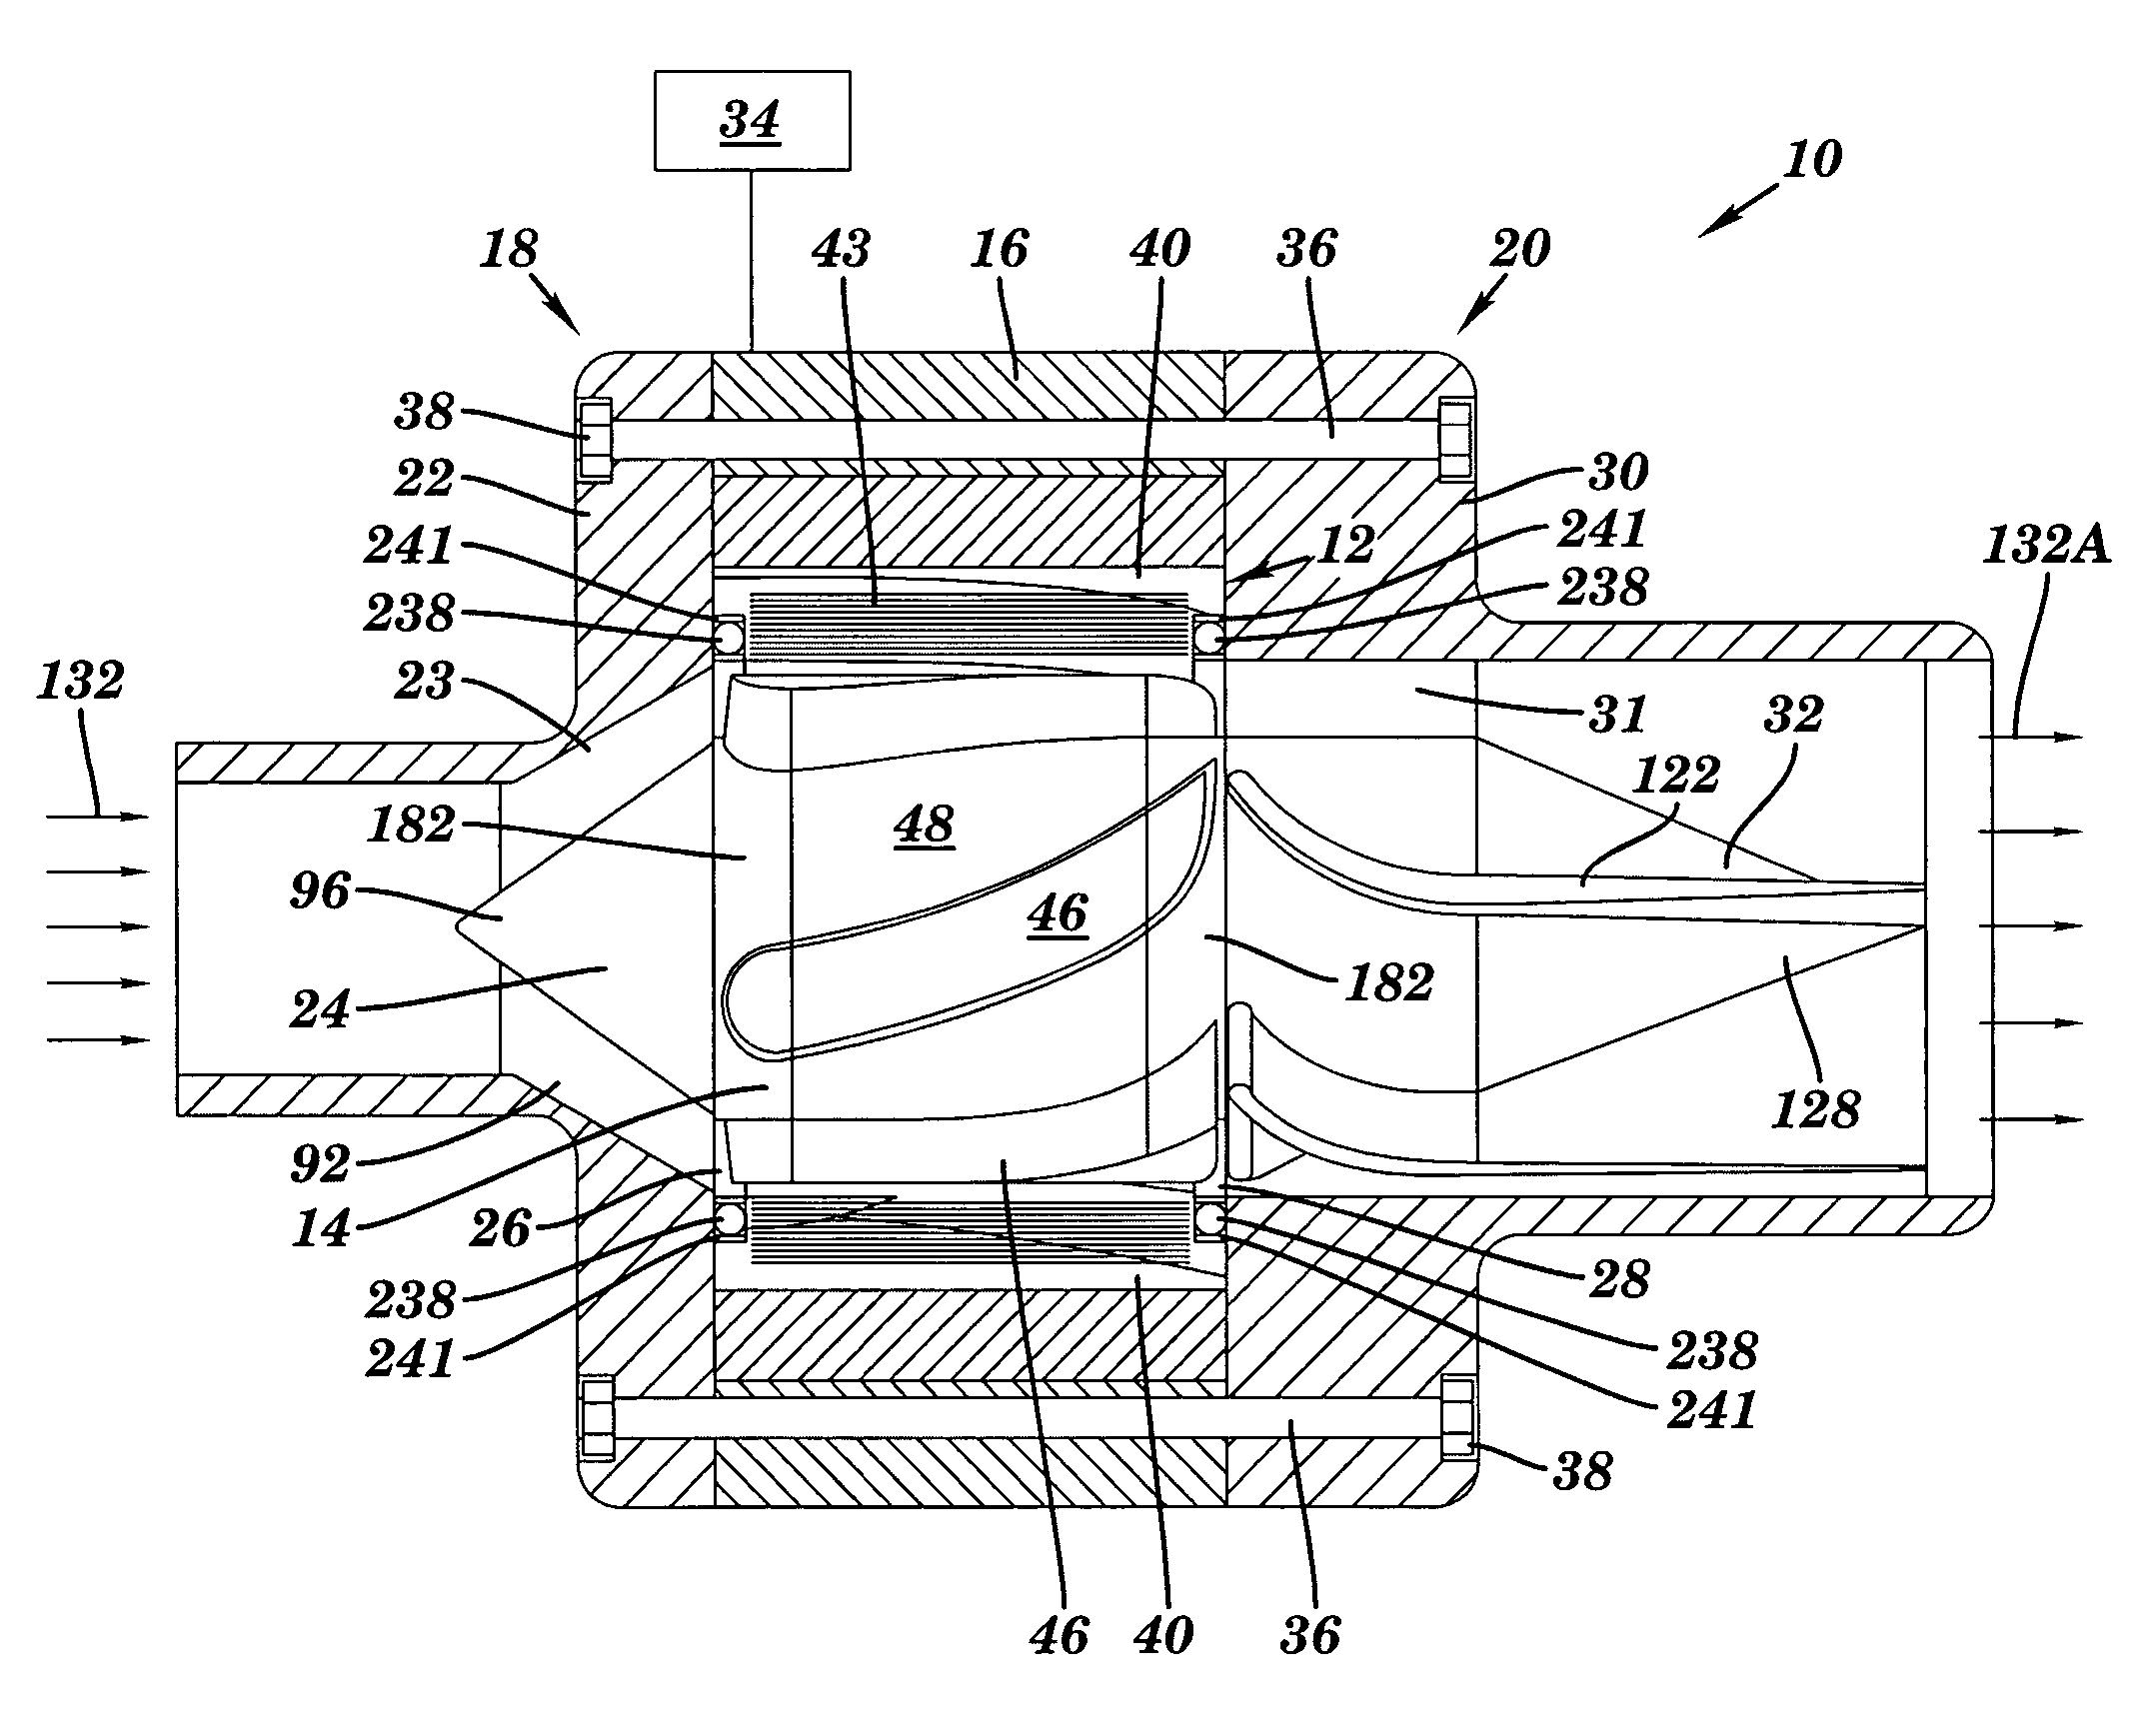 Fluid pump/generator with integrated motor and related stator and rotor and method of pumping fluid